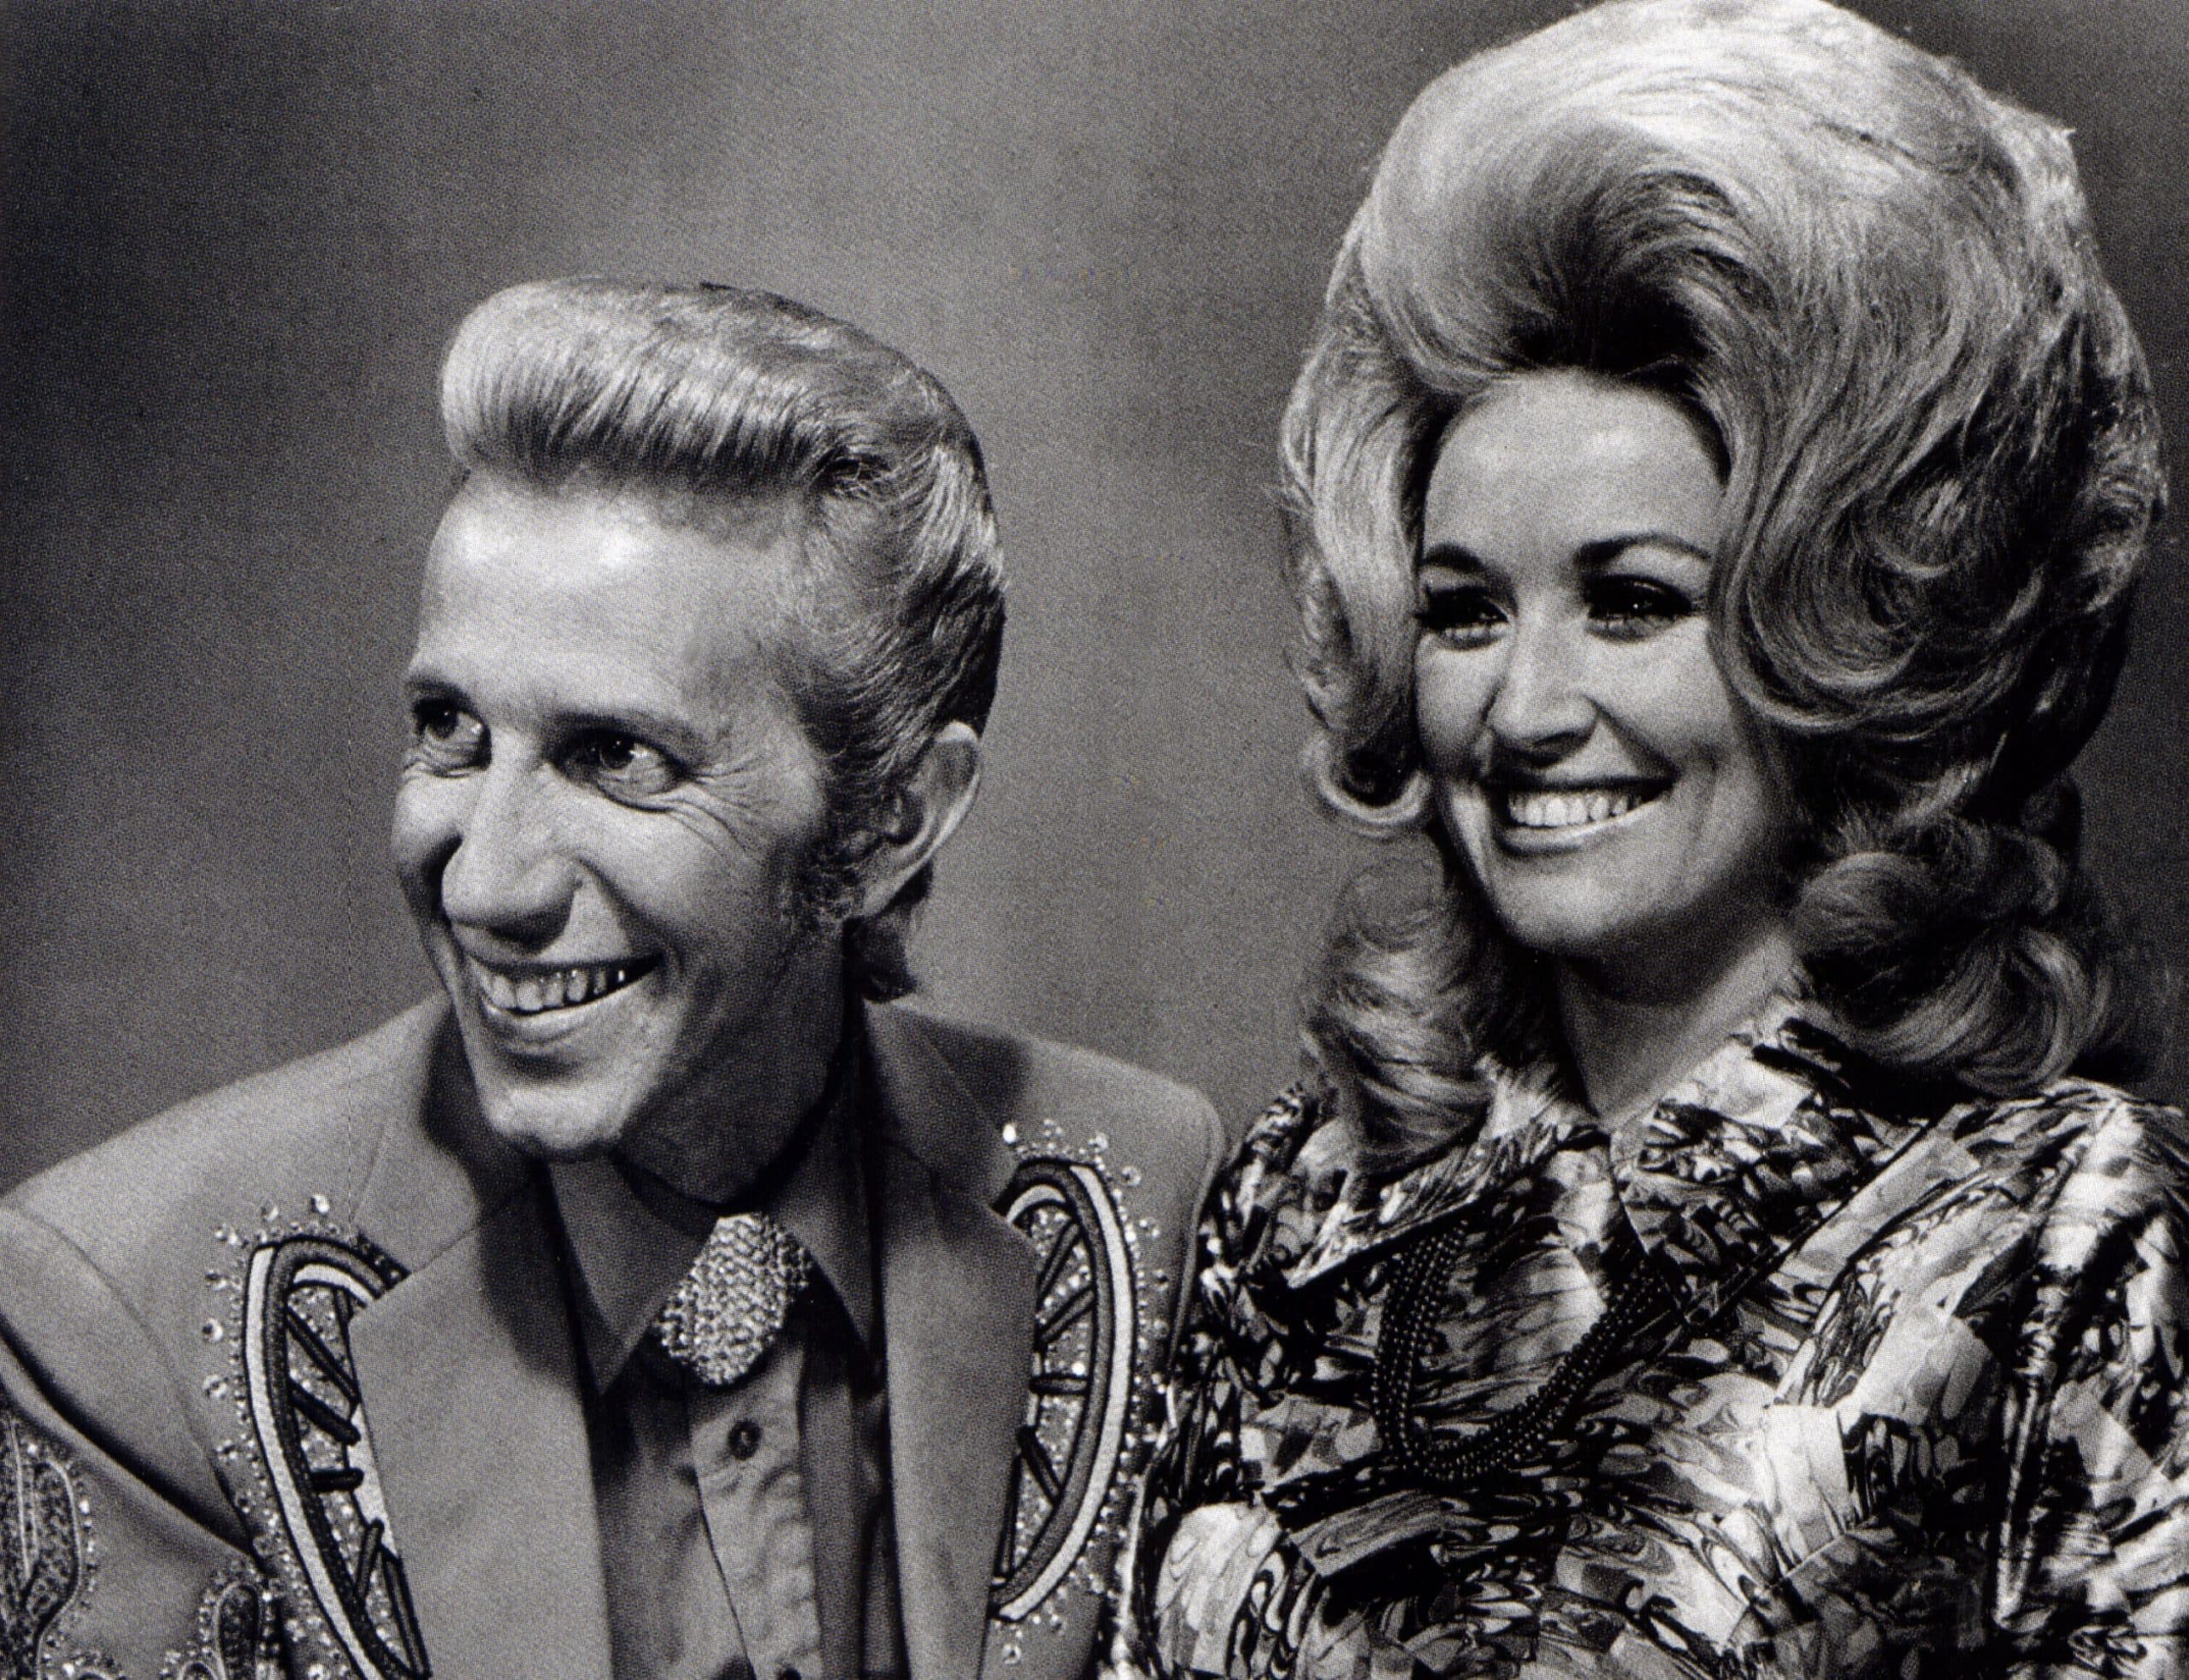 Picture of Porter Wagoner and Dolly Parton together